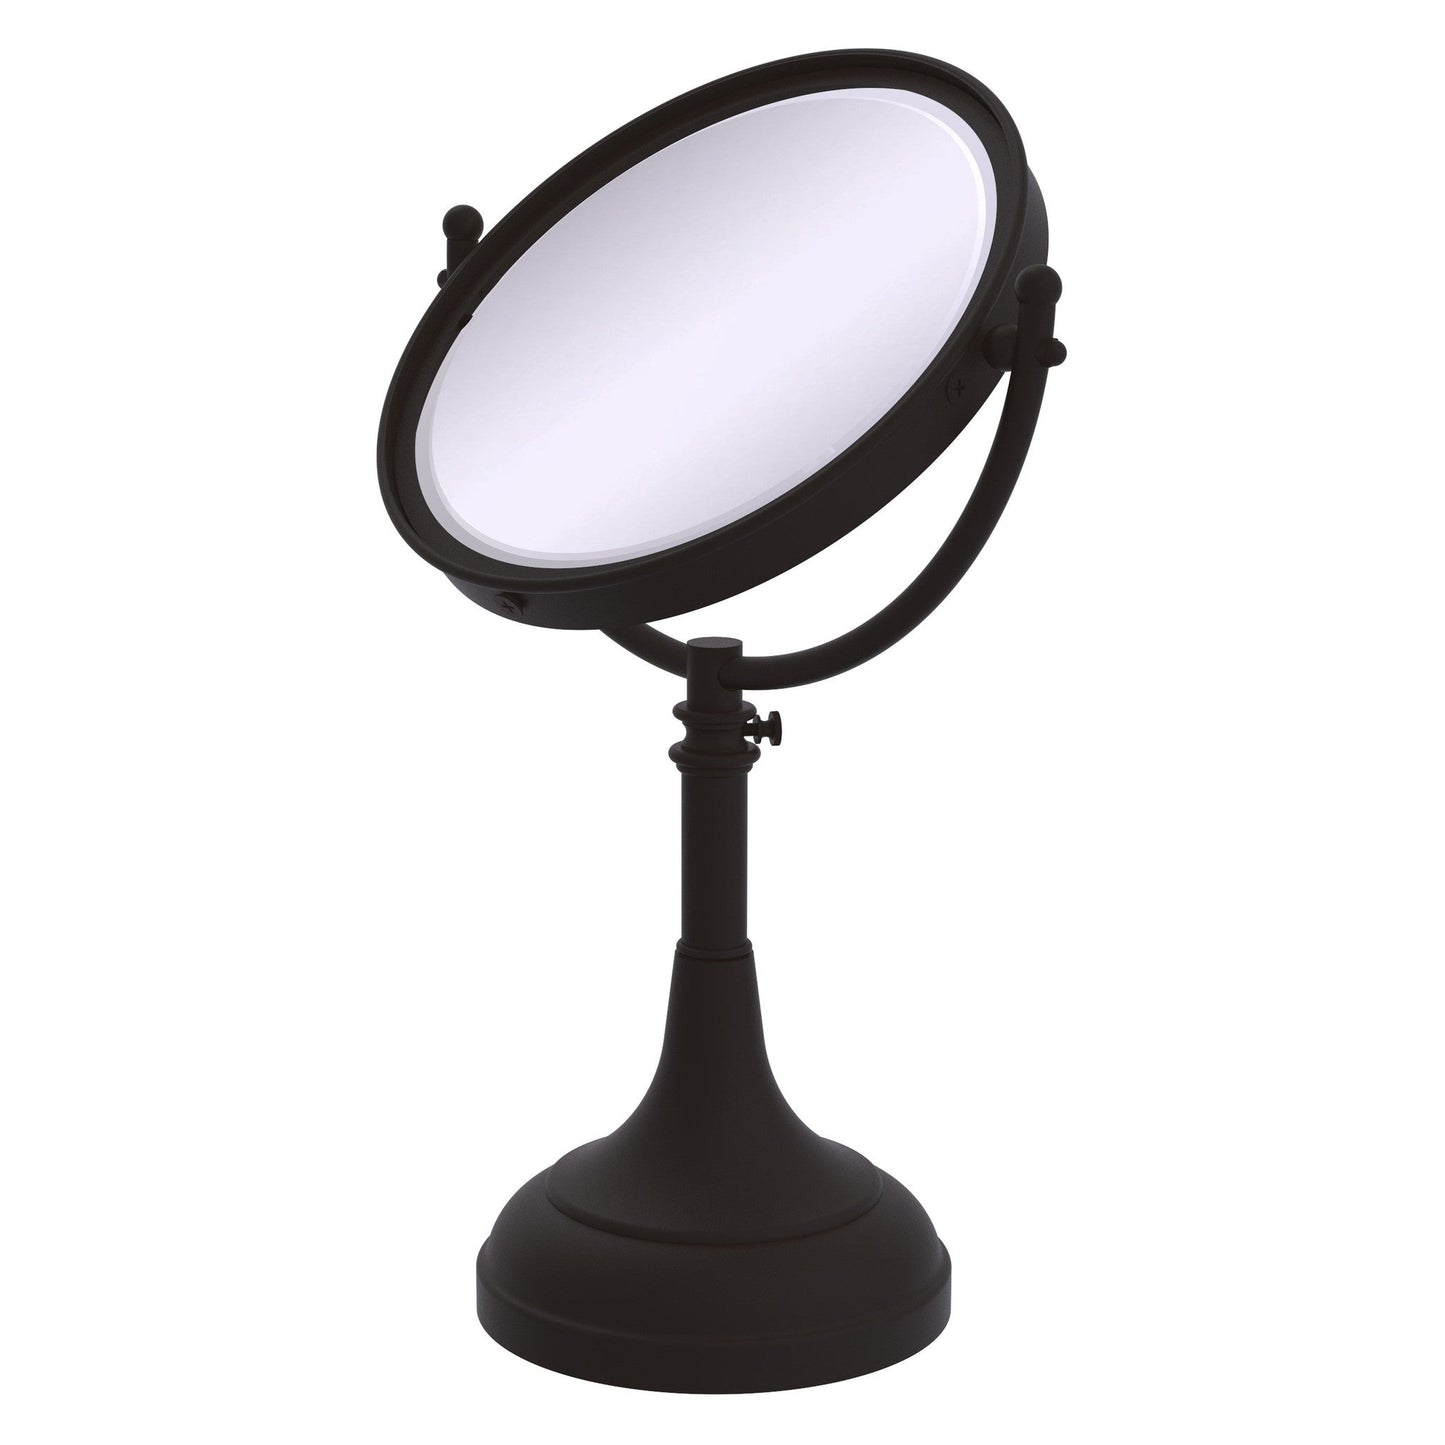 Allied Brass DM-1/2X 8" x 8" Oil Rubbed Bronze Solid Brass Vanity Top Make-Up Mirror 2X Magnification